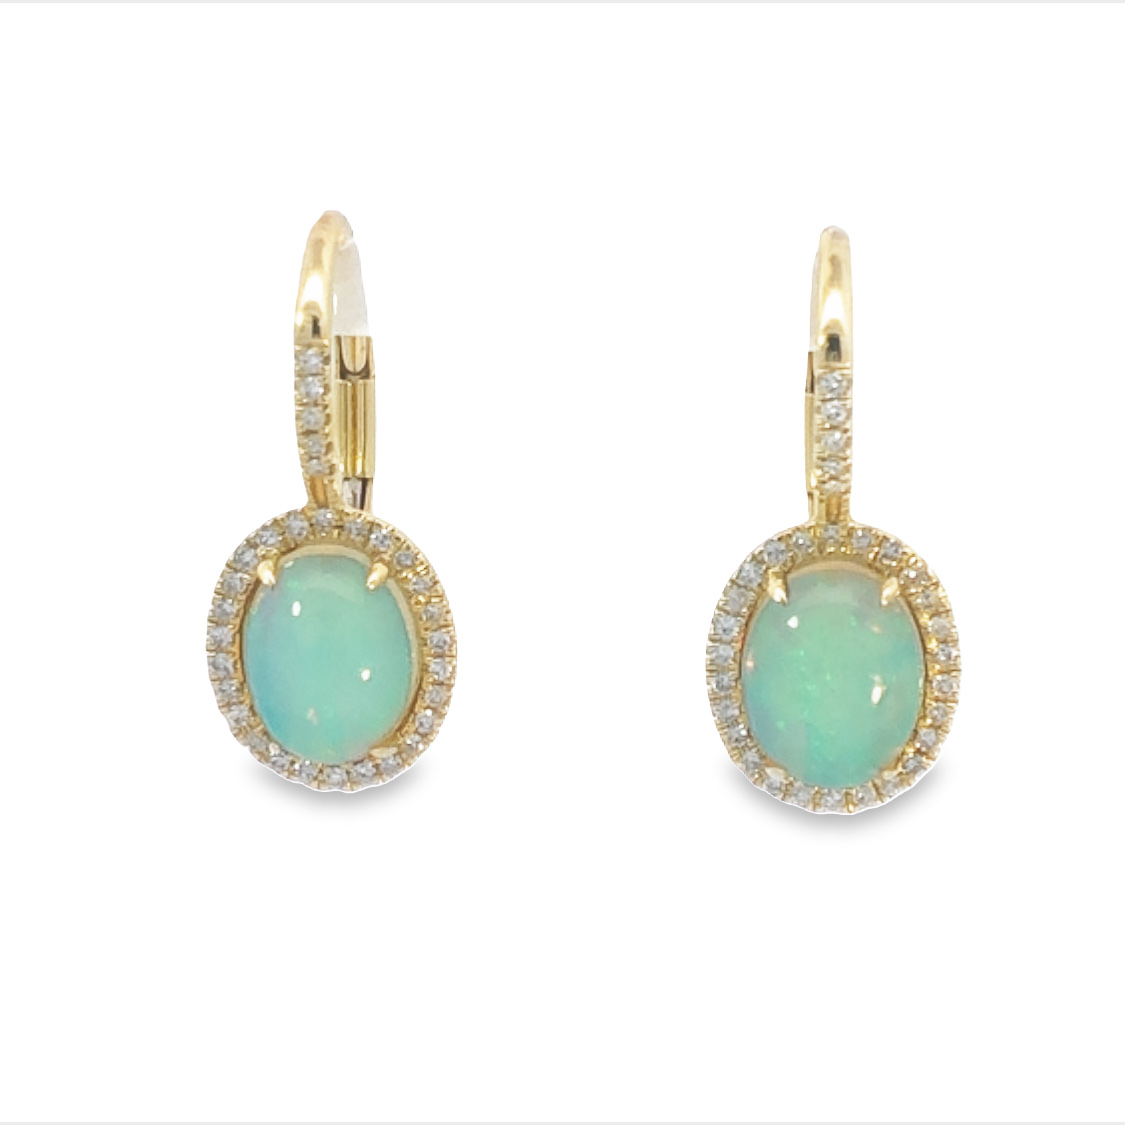 14K Yellow Gold Earrings with 2 Round Oval Opals 1.56 Tcw & 62 Round Diamonds 0.17 Tcw G-H SI